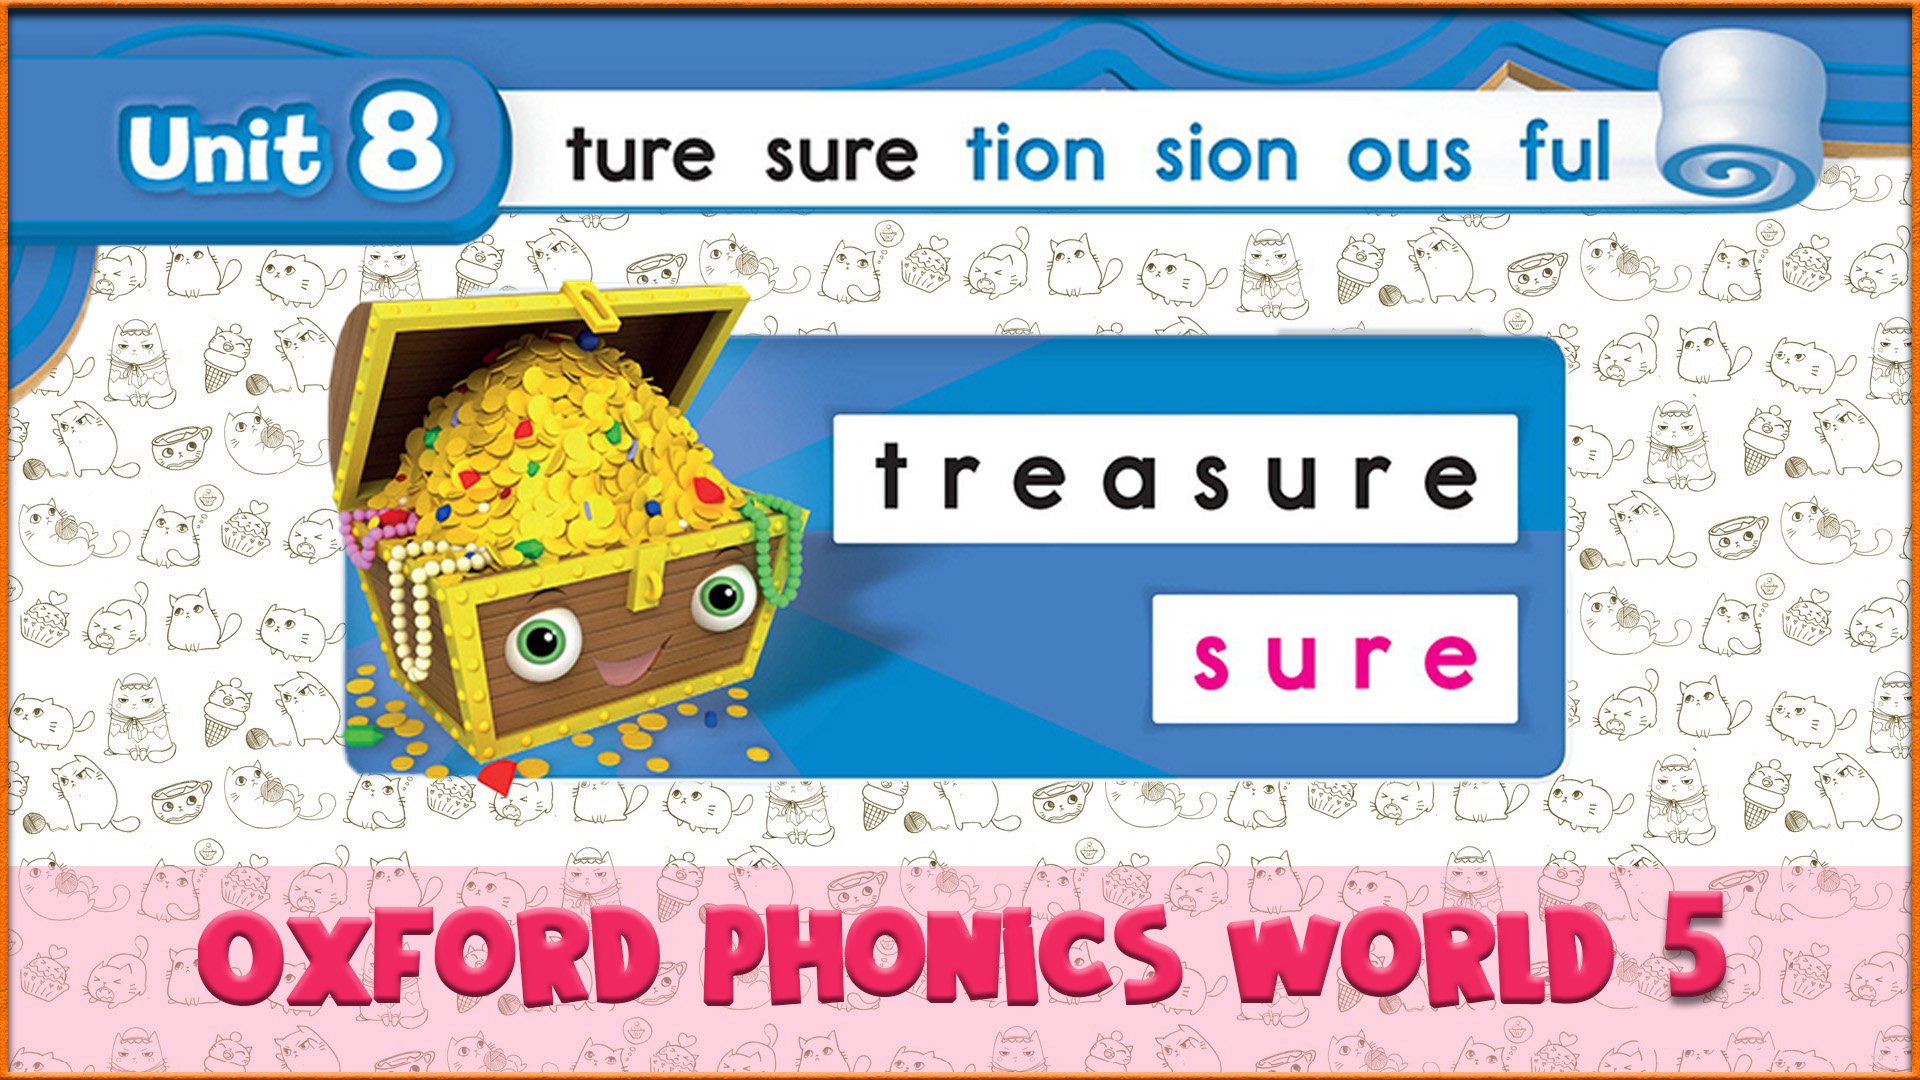 | sure | Oxford Phonics World 5 - Letter Combinations. #52